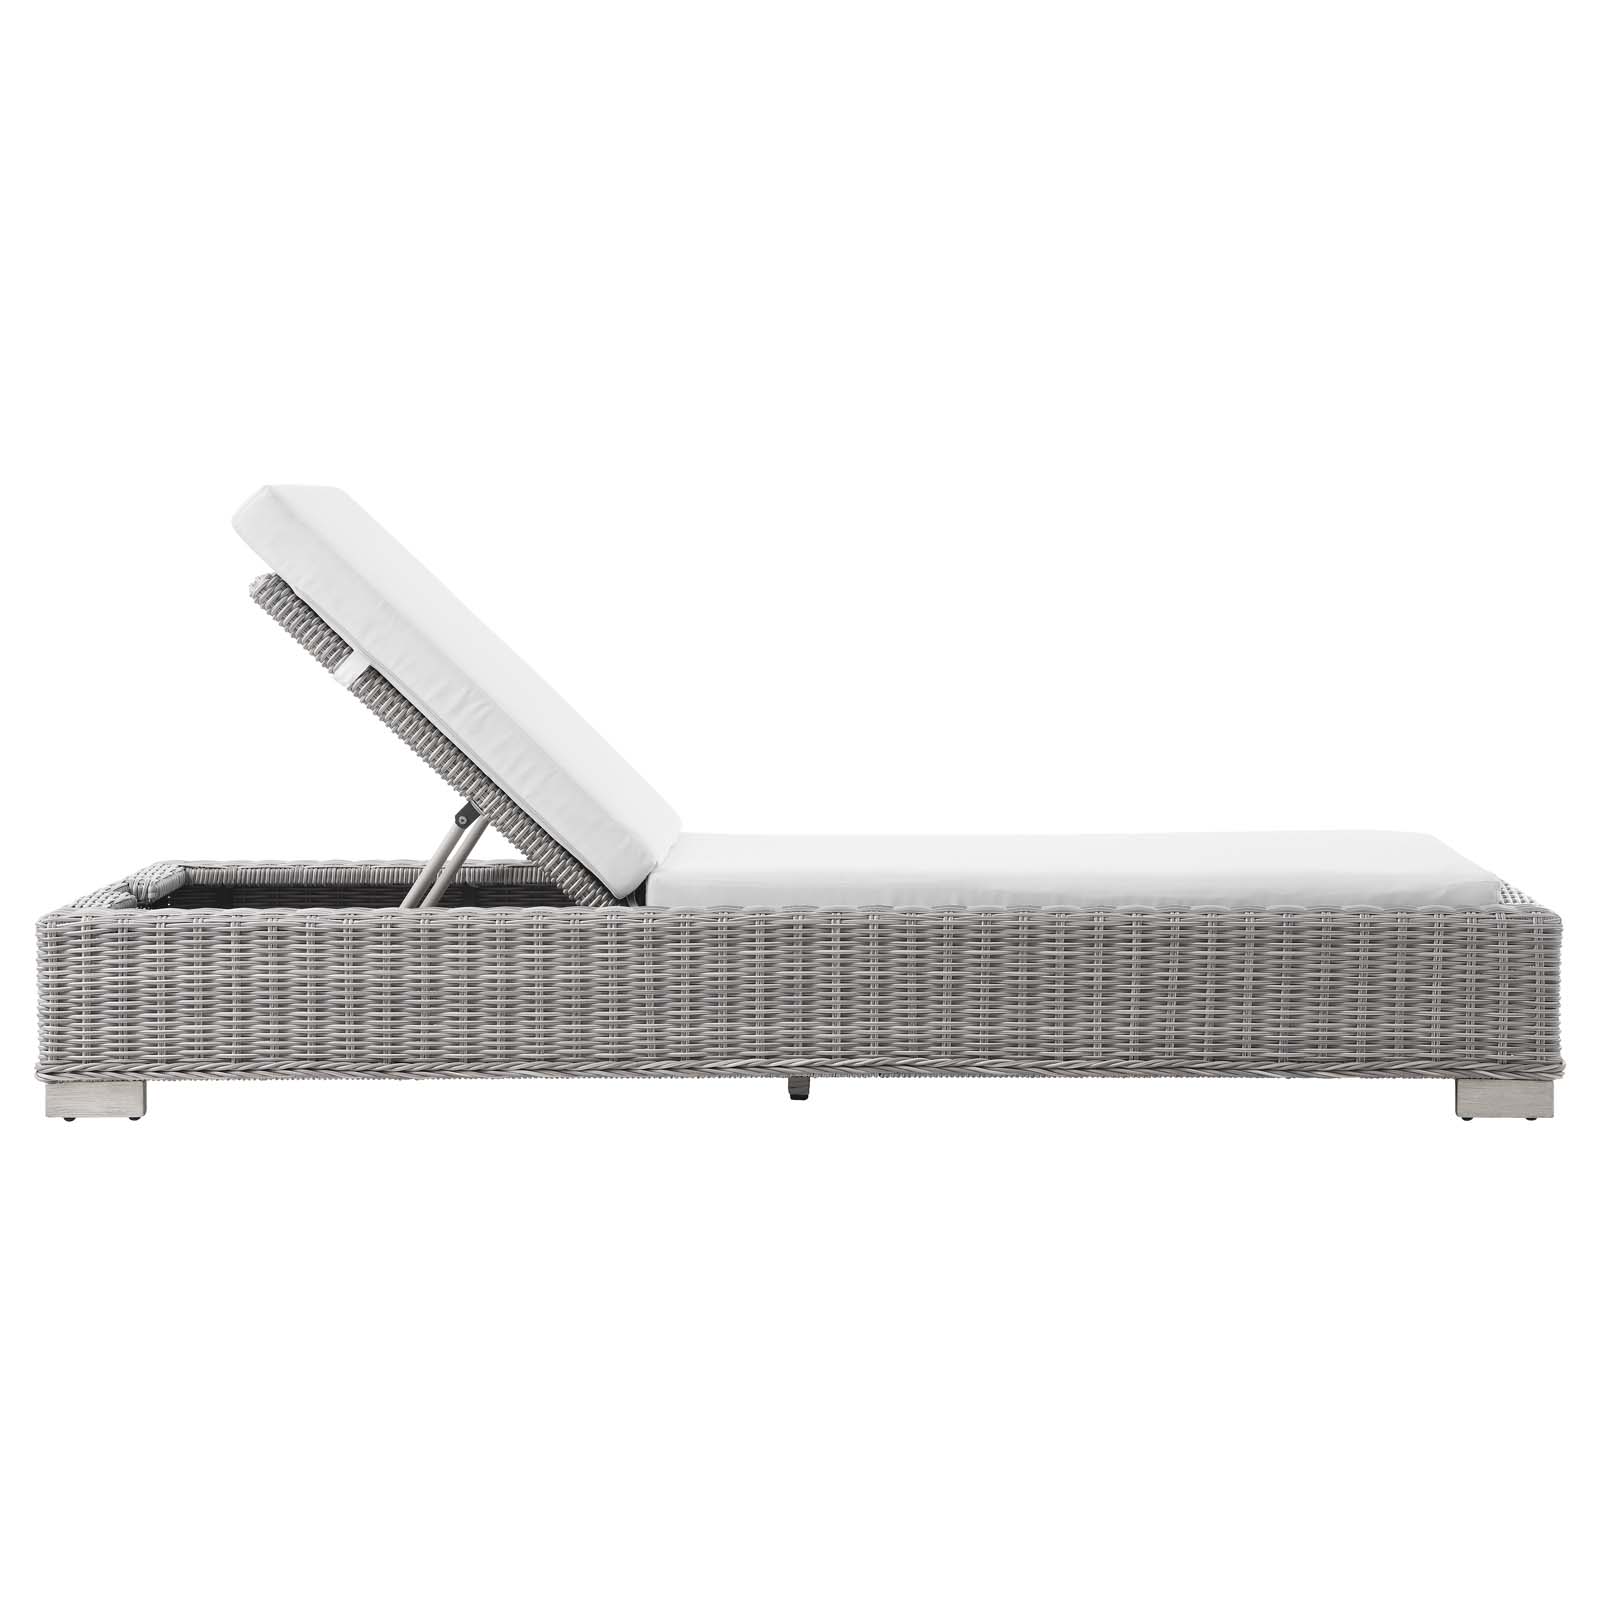 Modway Conway Outdoor Patio Wicker Rattan Chaise Lounge in Light Gray White - image 3 of 9